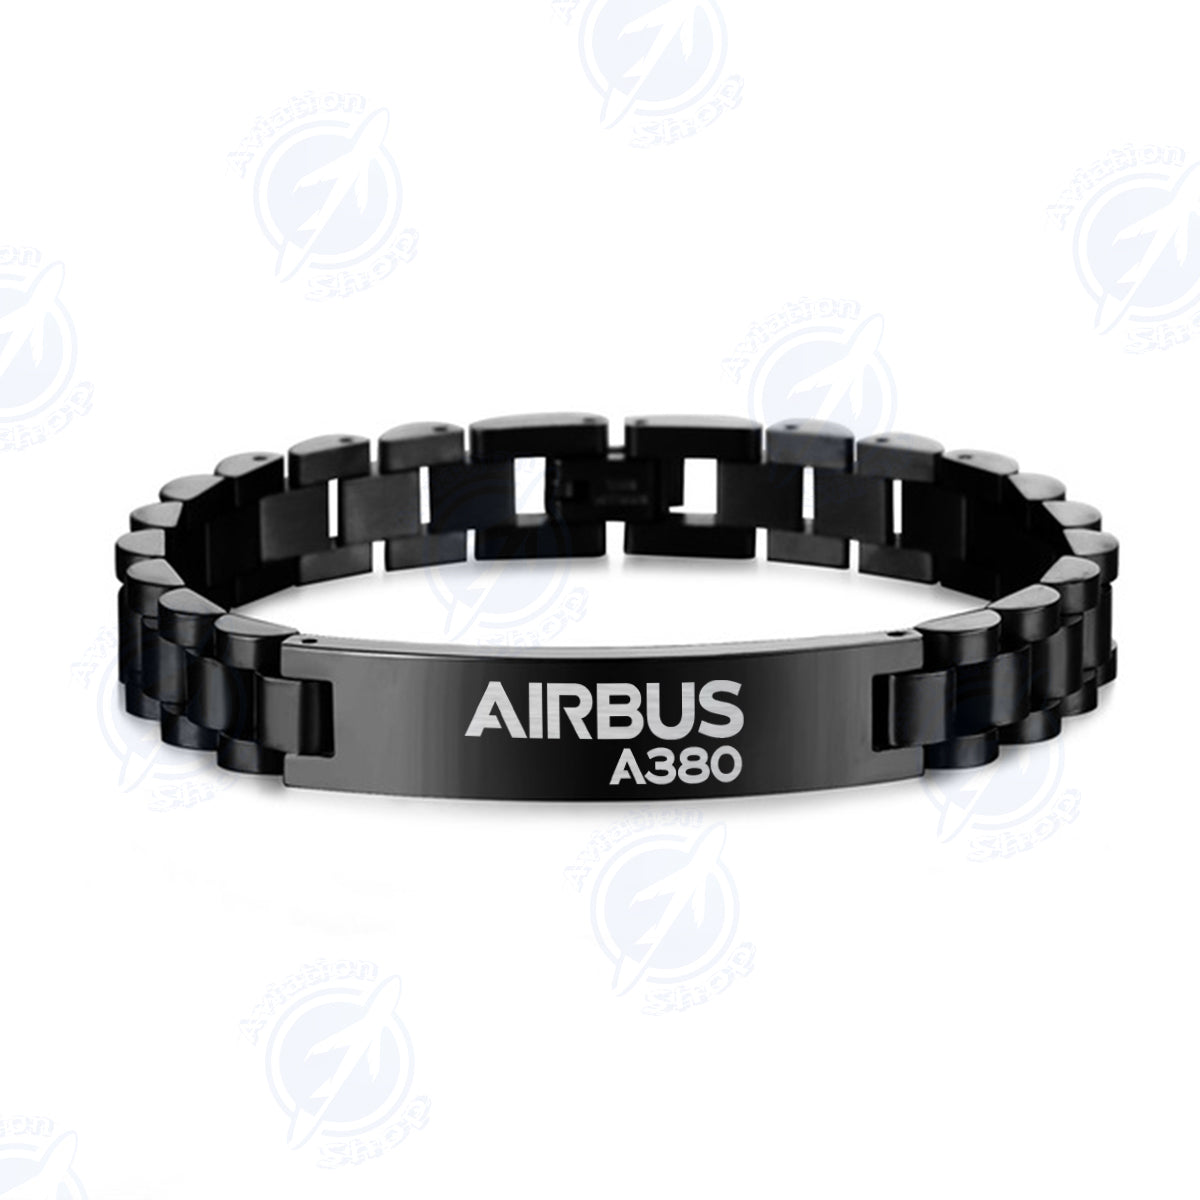 Airbus A380 & Text Designed Stainless Steel Chain Bracelets